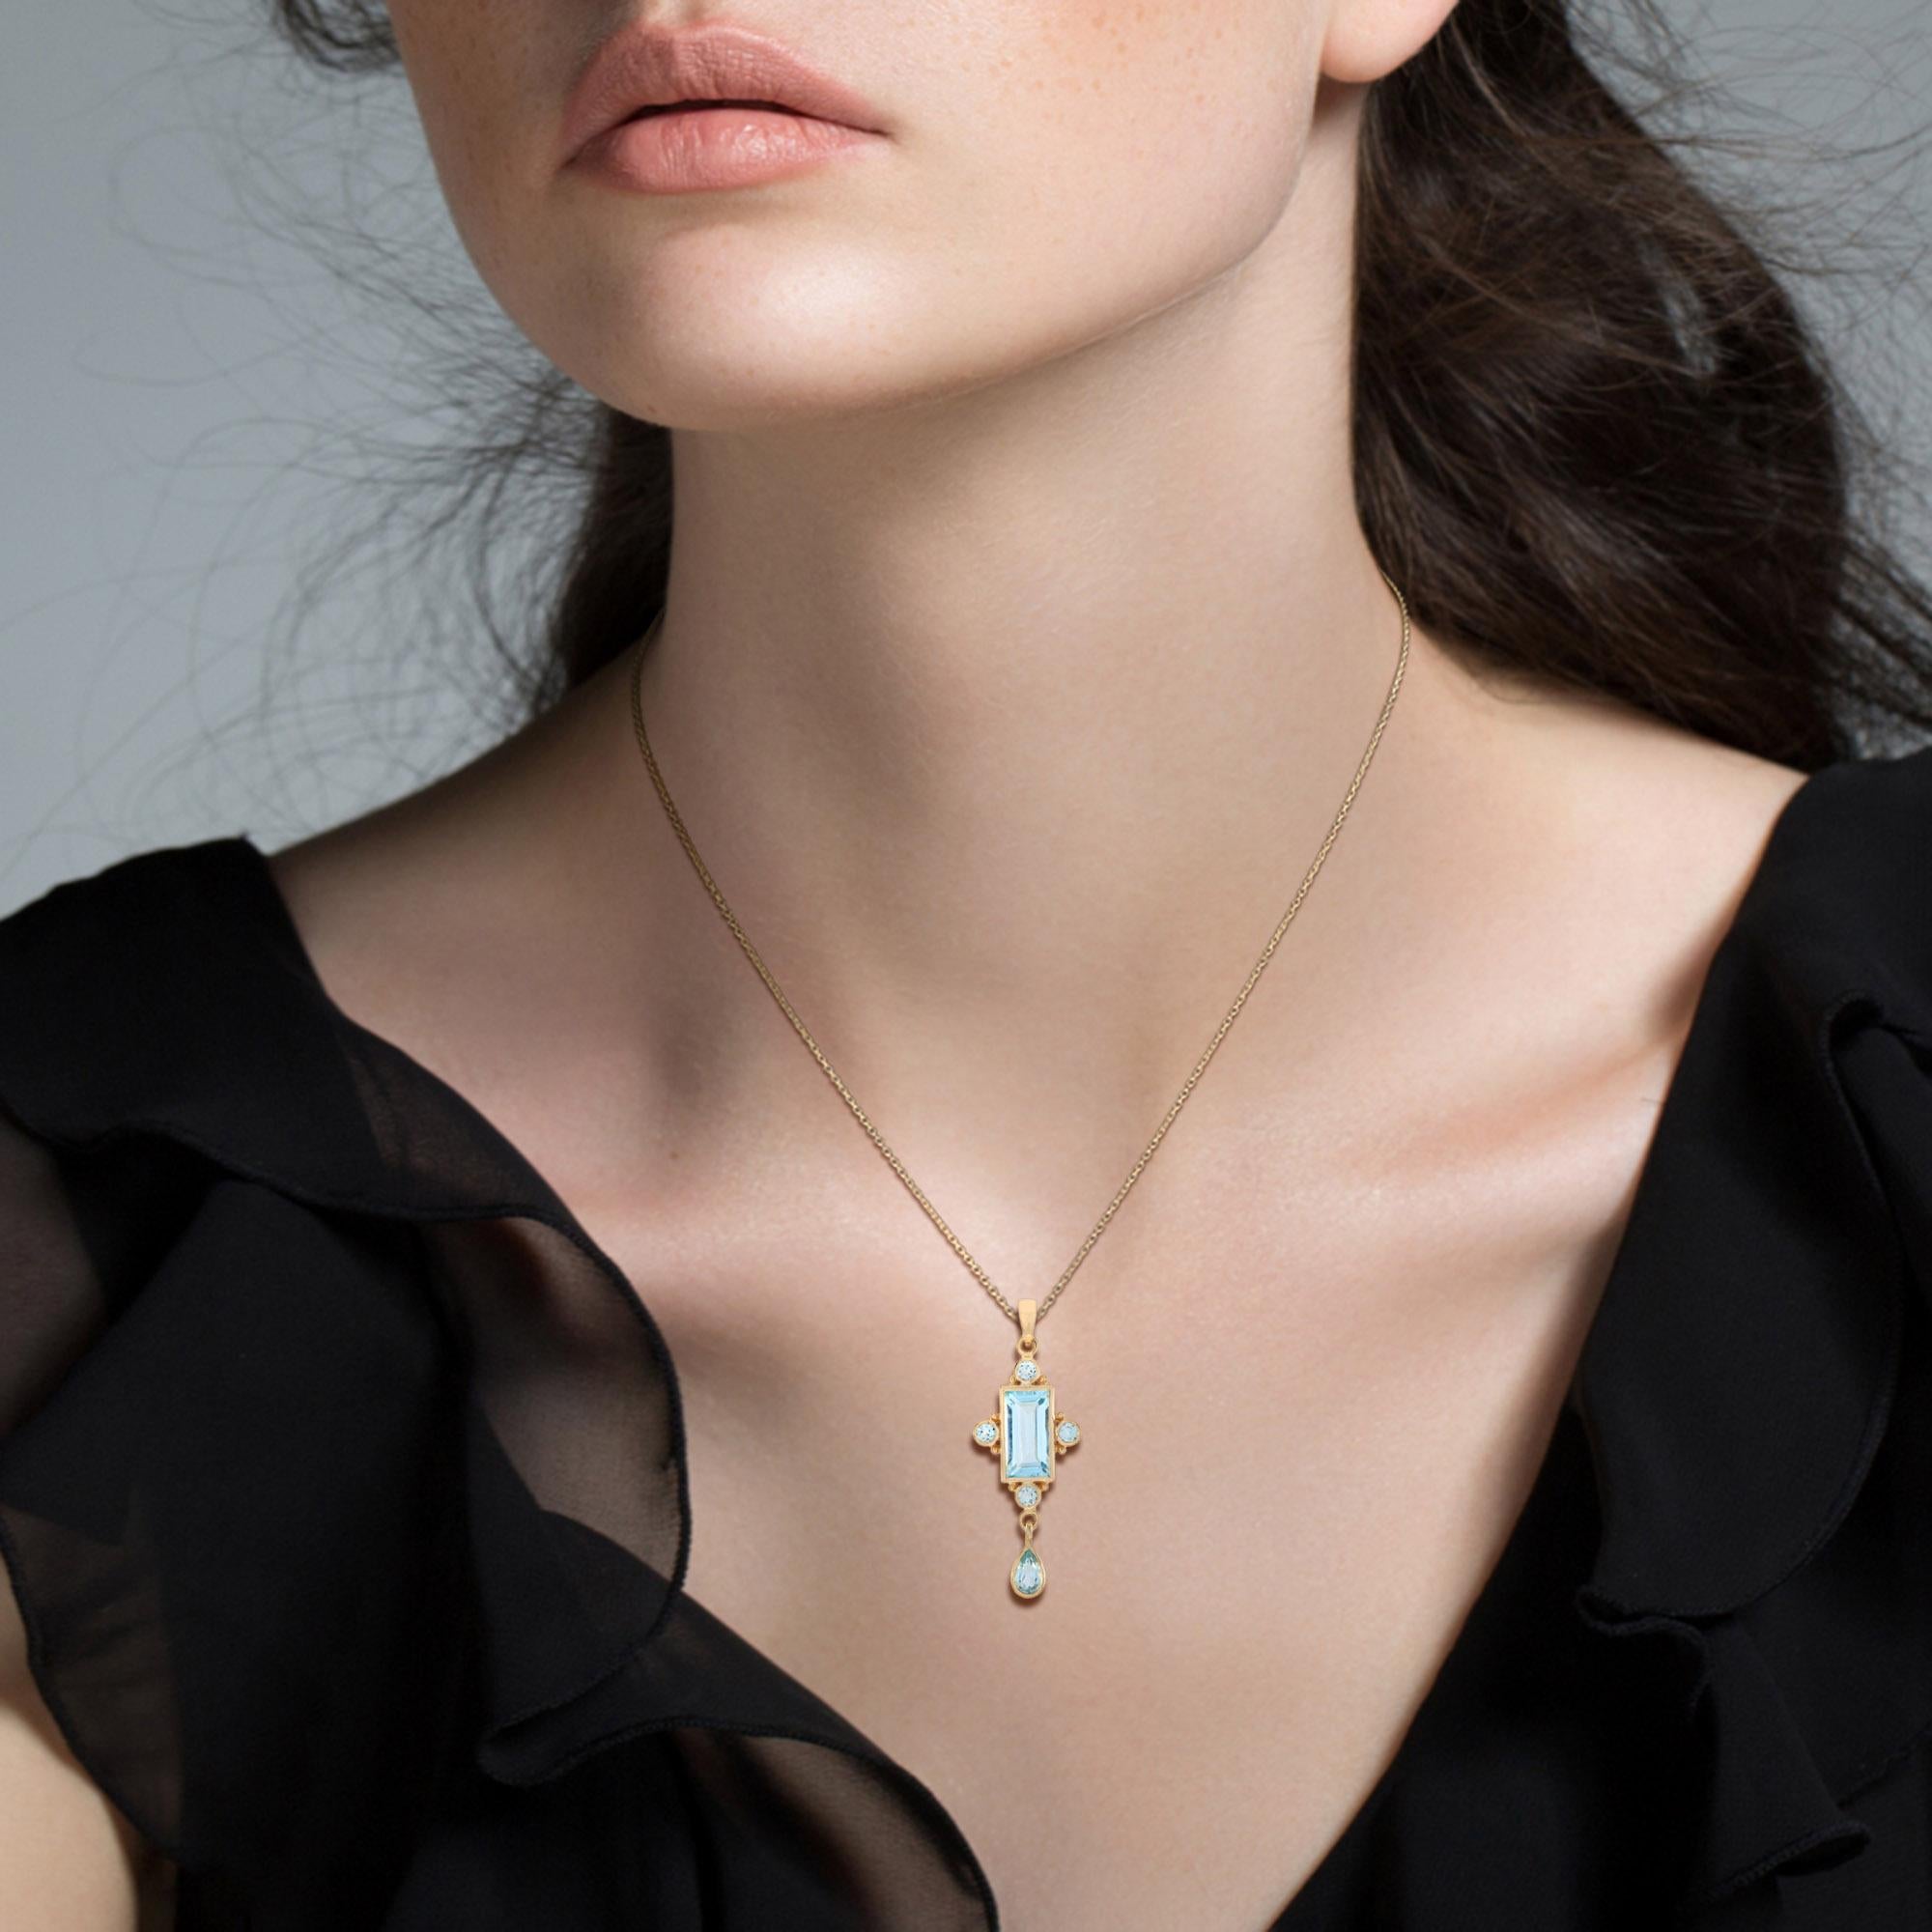 With a bright sky blue topaz in a bezel setting, this pendant is a simple but eye-catching style. The stone is further accentuated with smaller round and drop blue topaz. This piece is perfect to wear alone or layered with your favorite pieces to